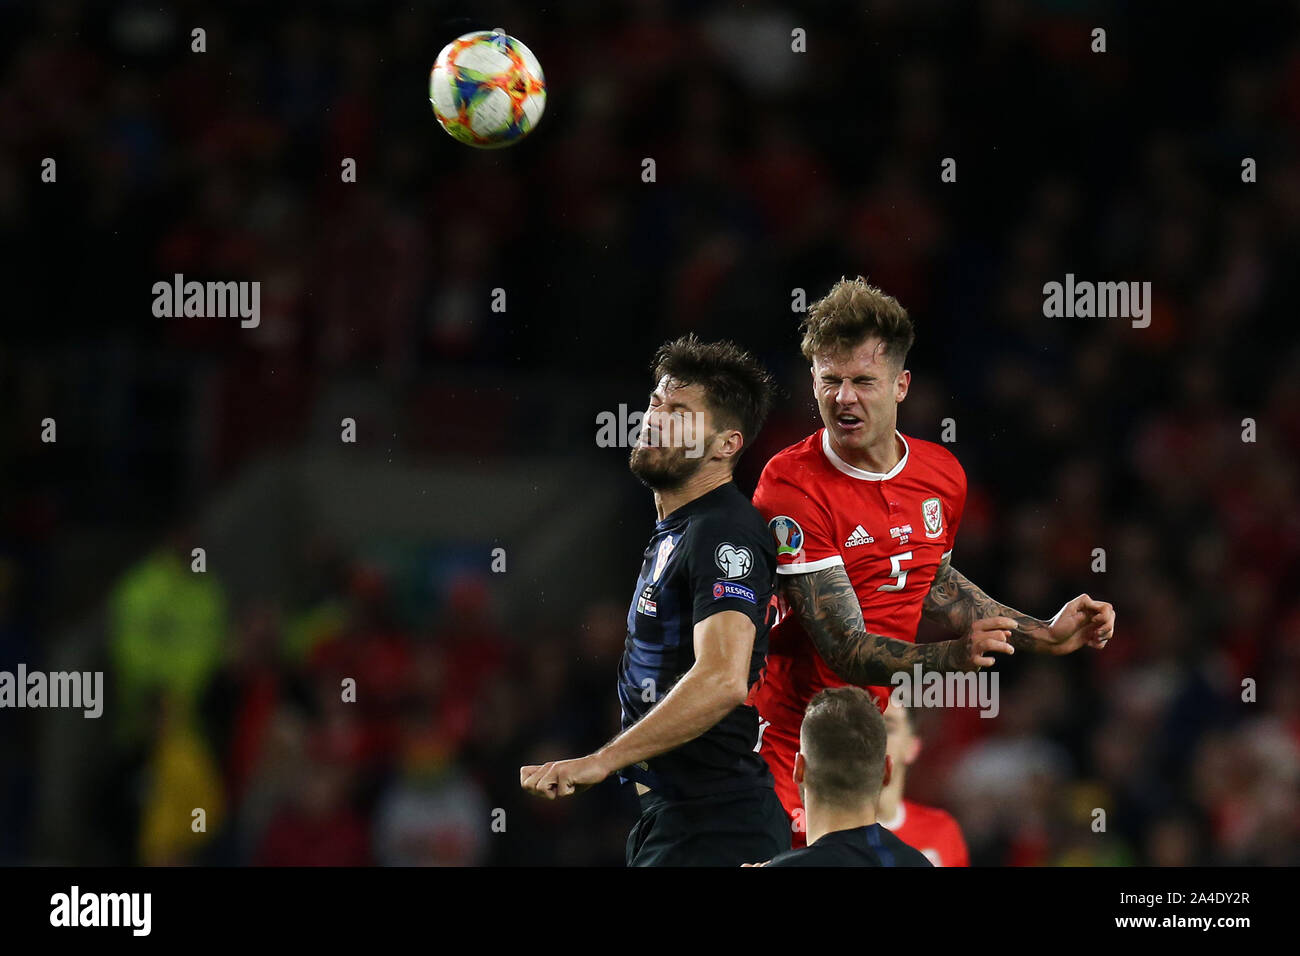 Cardiff, UK. 13th Oct, 2019. Joe Rodon of Wales jumps for a header with Bruno Petkovic of Croatia (l).UEFA Euro 2020 qualifier match, Wales v Croatia at the Cardiff city Stadium in Cardiff, South Wales on Sunday 13th October 2019. pic by Andrew Orchard /Andrew Orchard sports photography/Alamy live News EDITORIAL USE ONLY Credit: Andrew Orchard sports photography/Alamy Live News Stock Photo